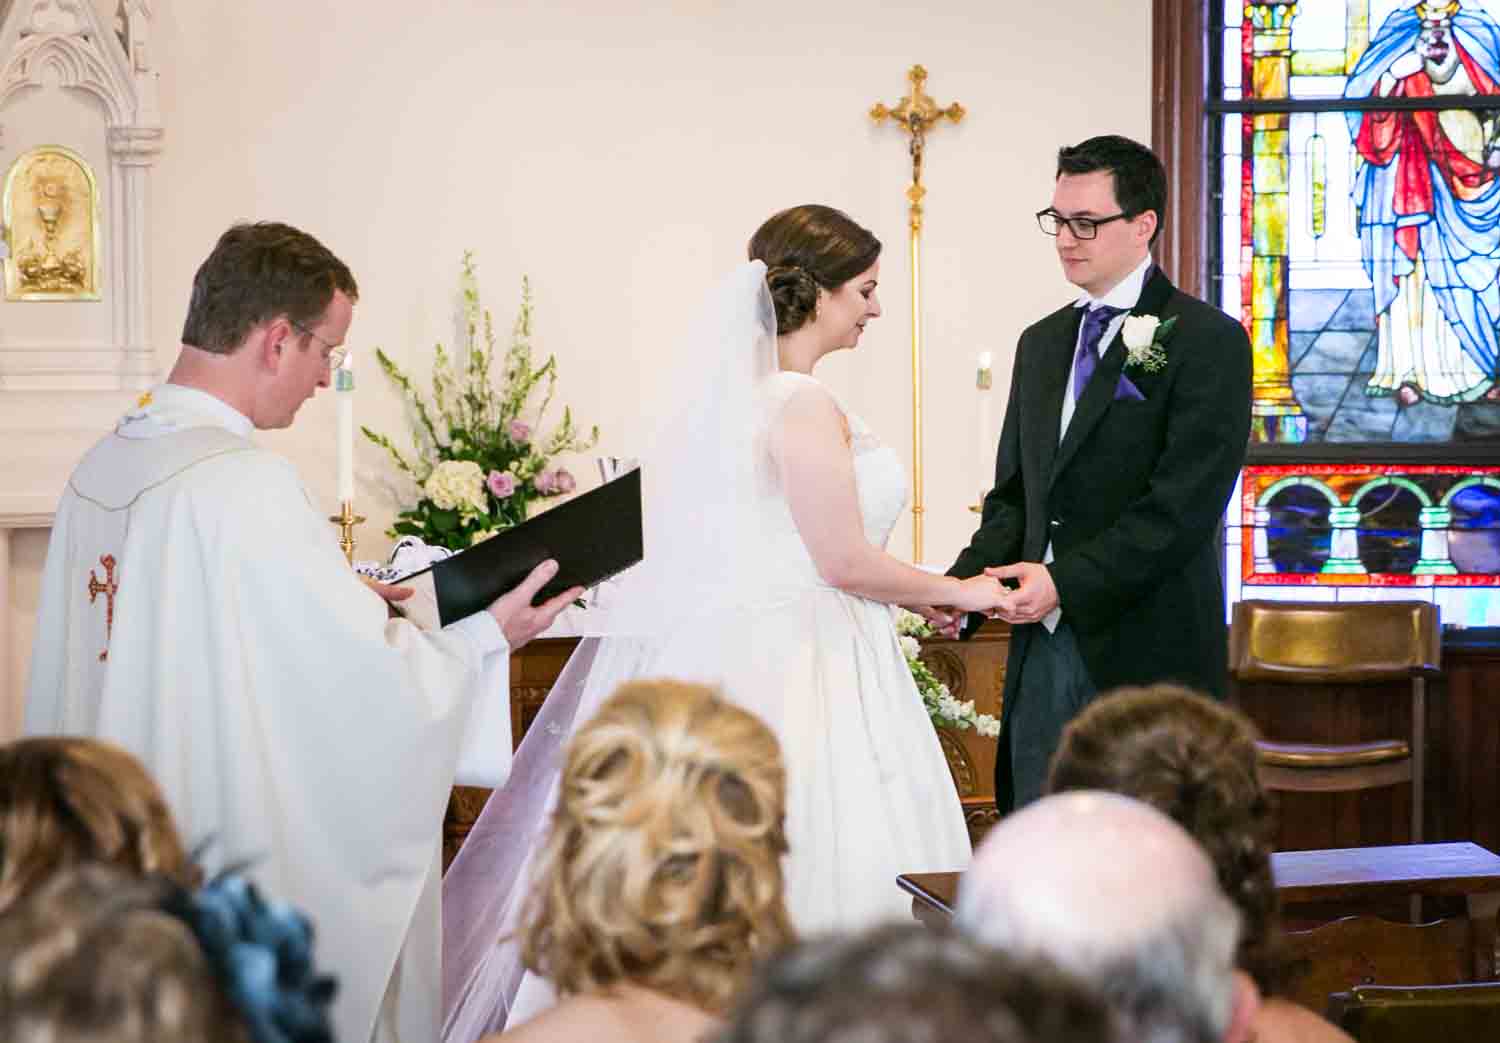 Bride and groom exchanging vows at St. James Church